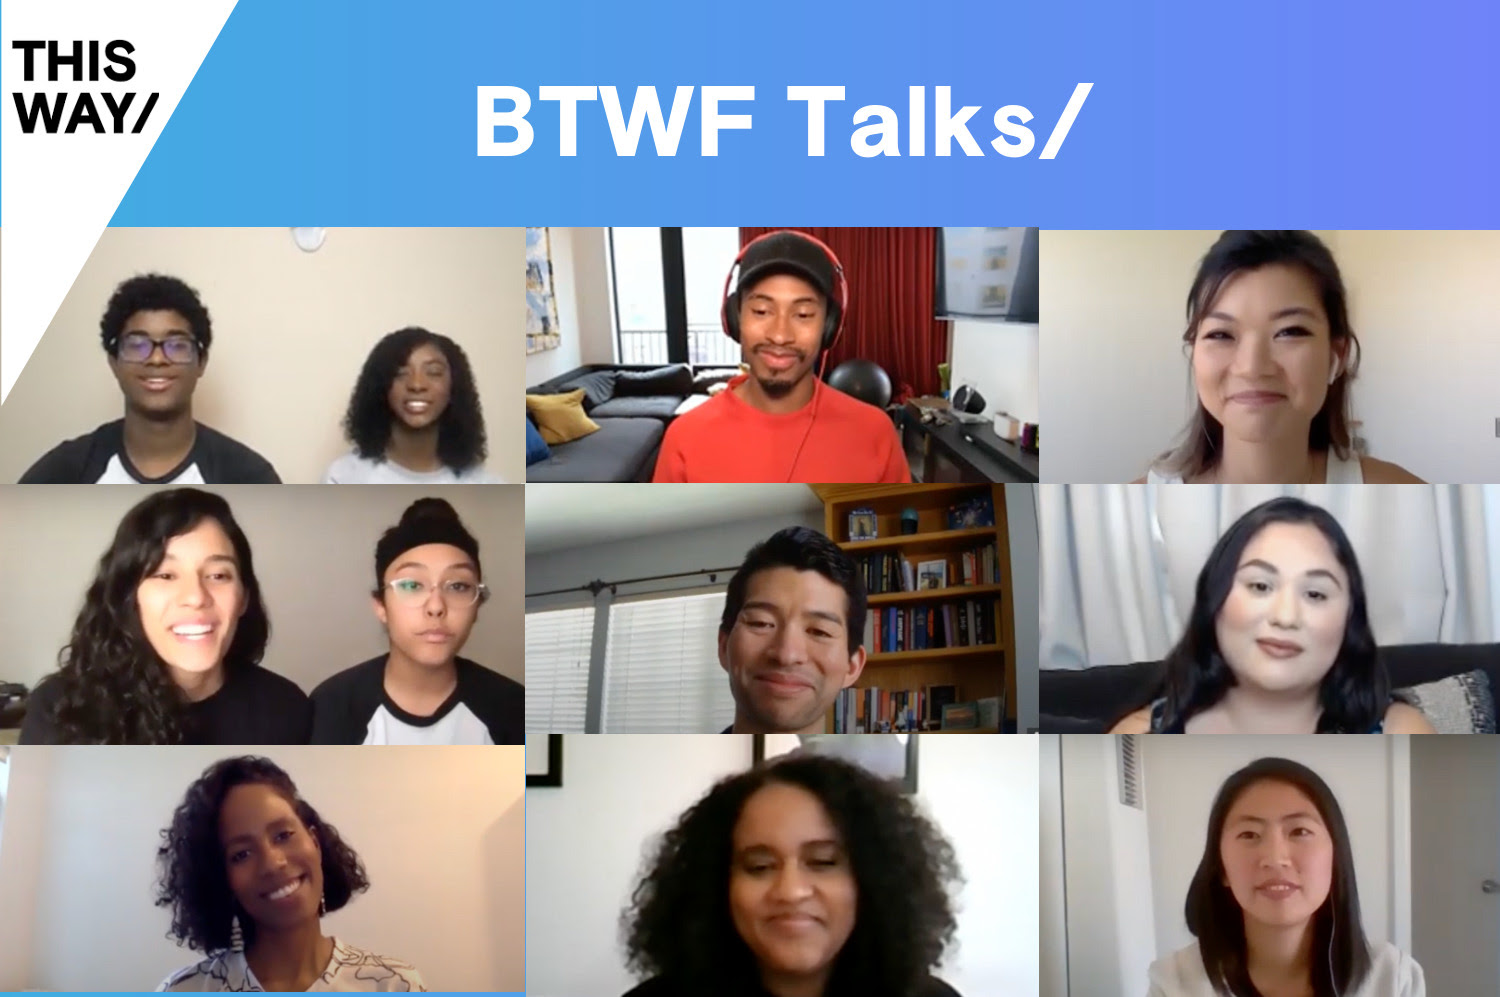 Blue/Purple gradient graphic with images of BTWF Talks/ participants in the center + THIS WAY/ branded cornerstone in the top left corner.